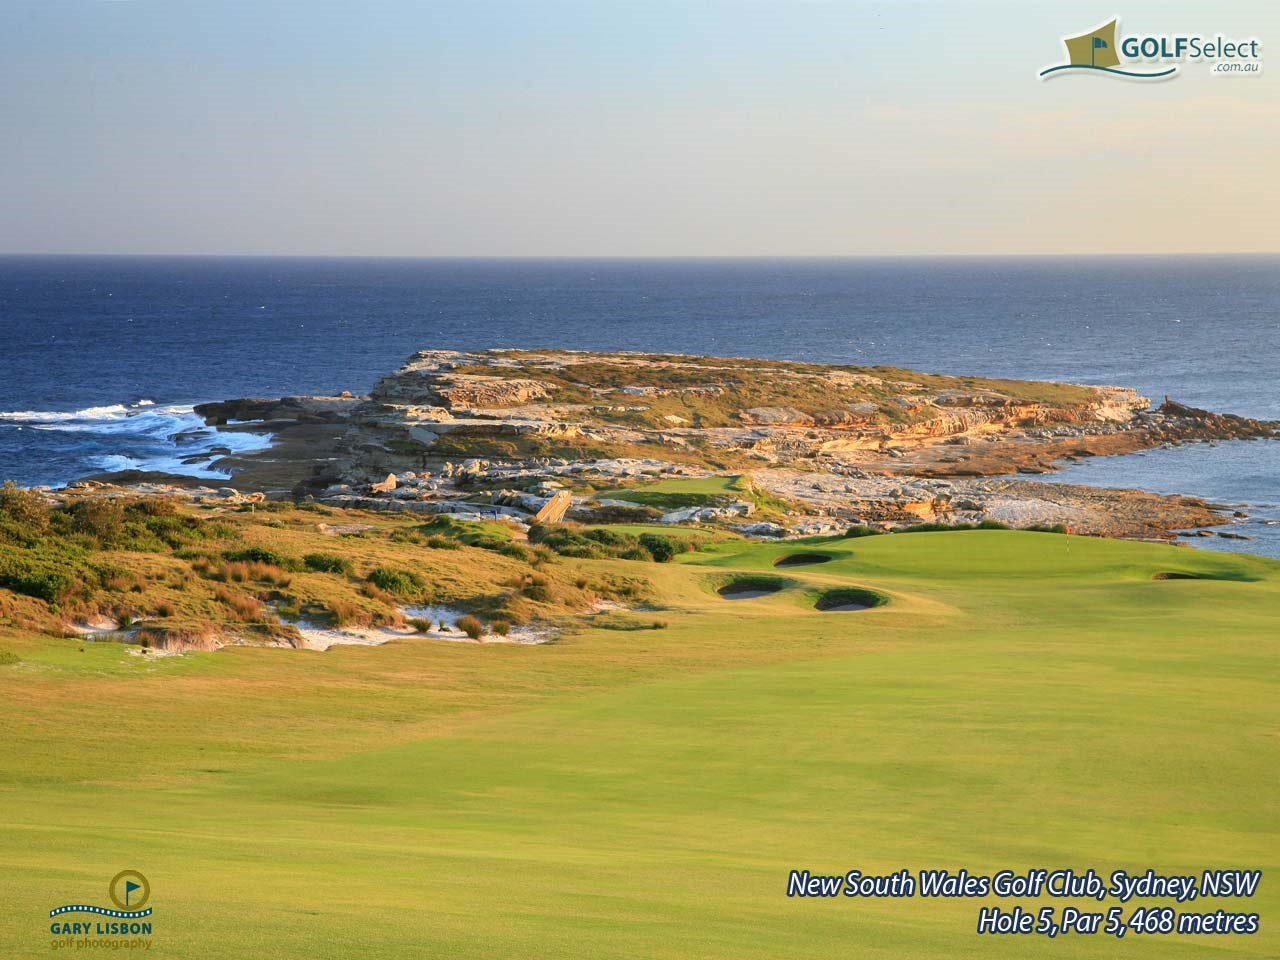 The New South Wales Golf Club Hole 5, Par 5, 468 metres